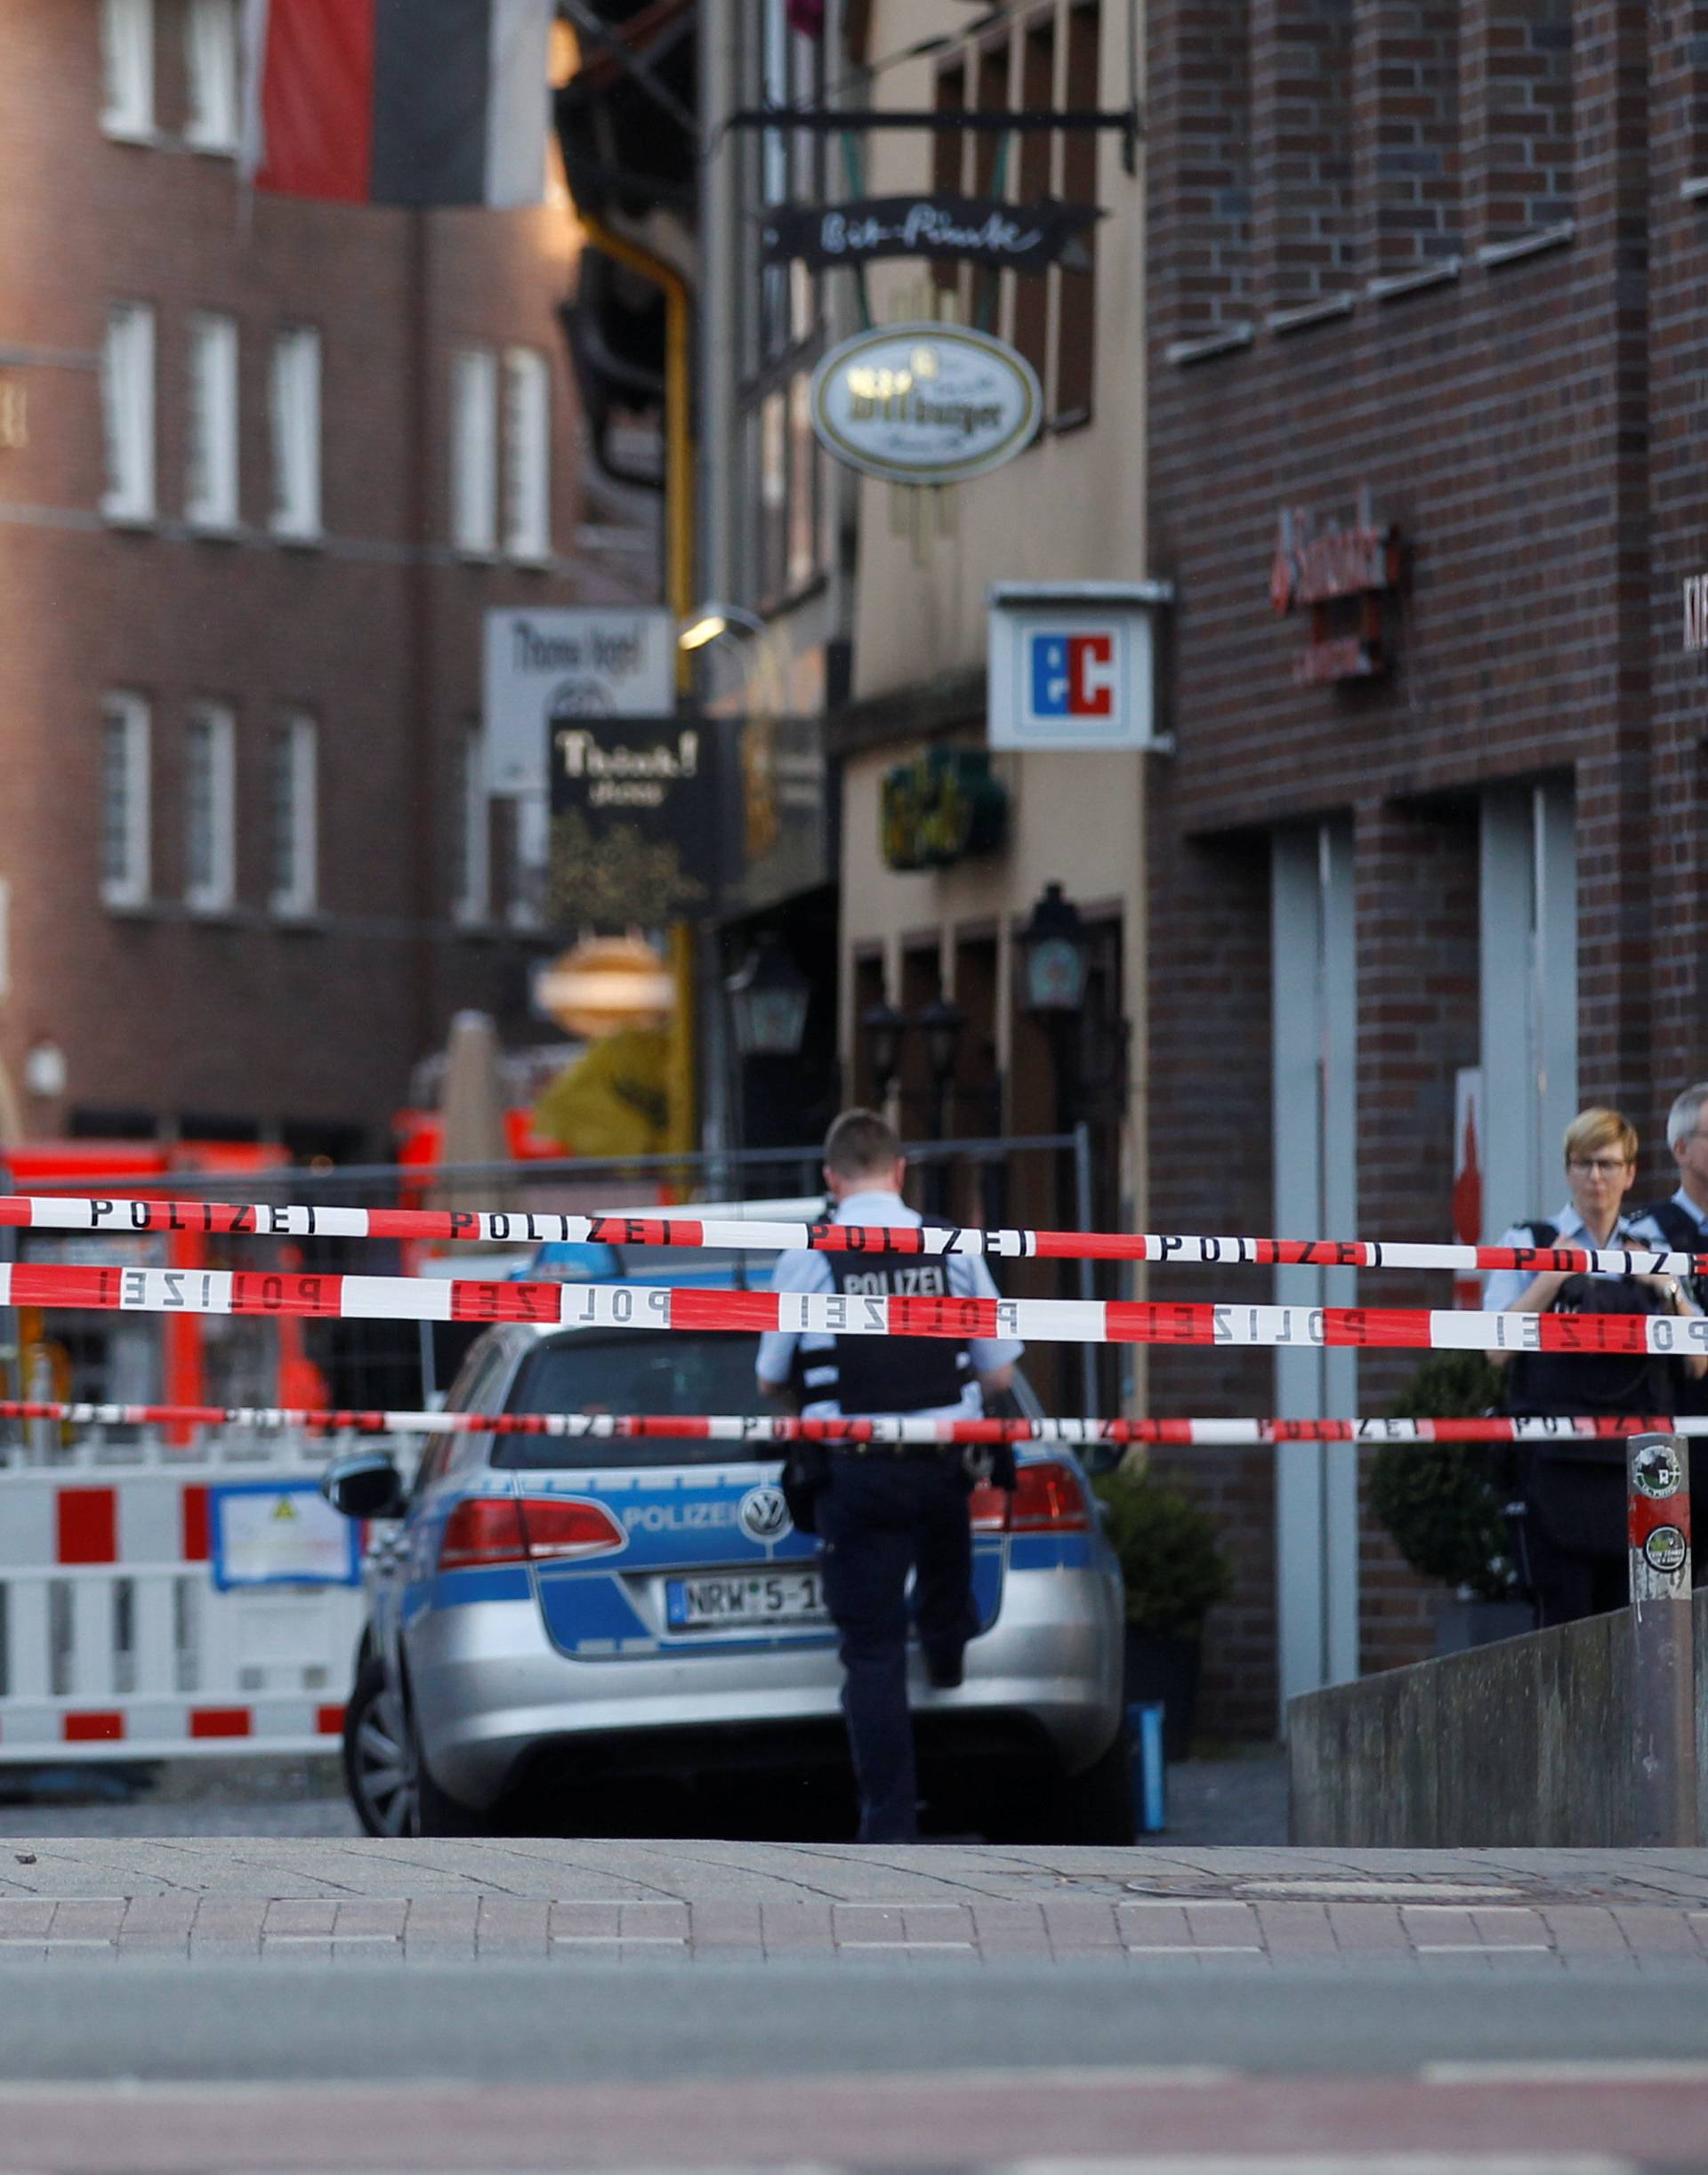 A man drove a van into a group of people sitting outside a popular restaurant in the old city centre of Muenster